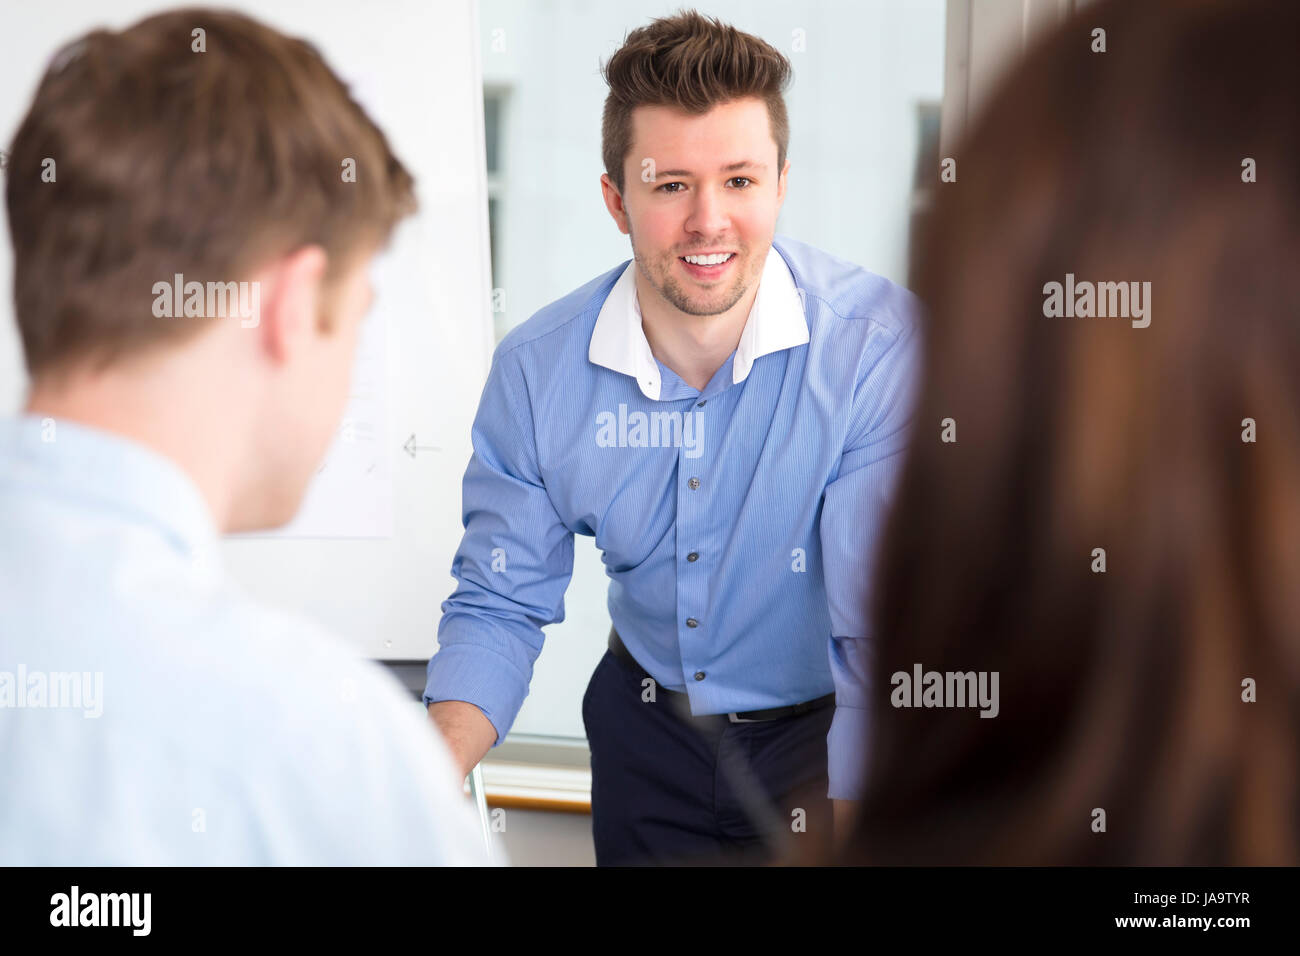 Businessman Smiling While Looking At Colleagues In Office Stock Photo